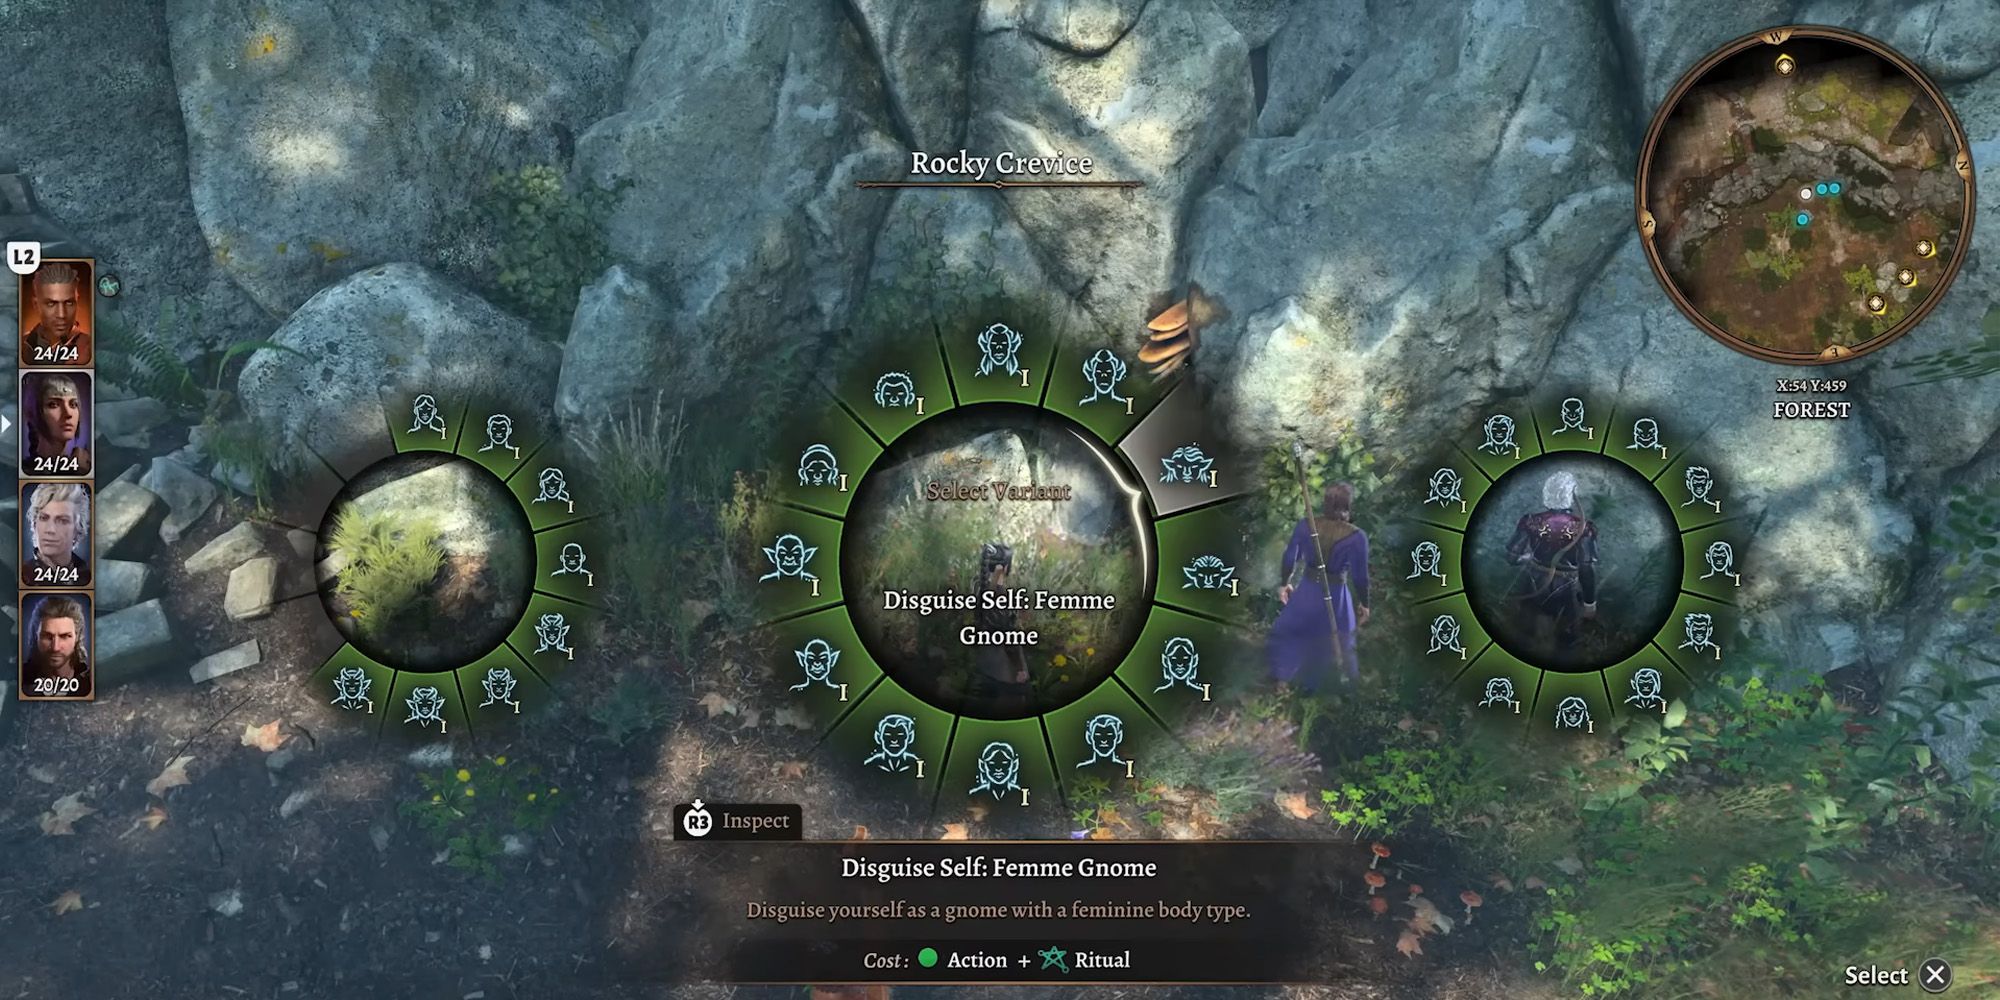 How Baldur's Gate 3 adapts its expansive RPG gameplay for your DualSense  controller – PlayStation.Blog